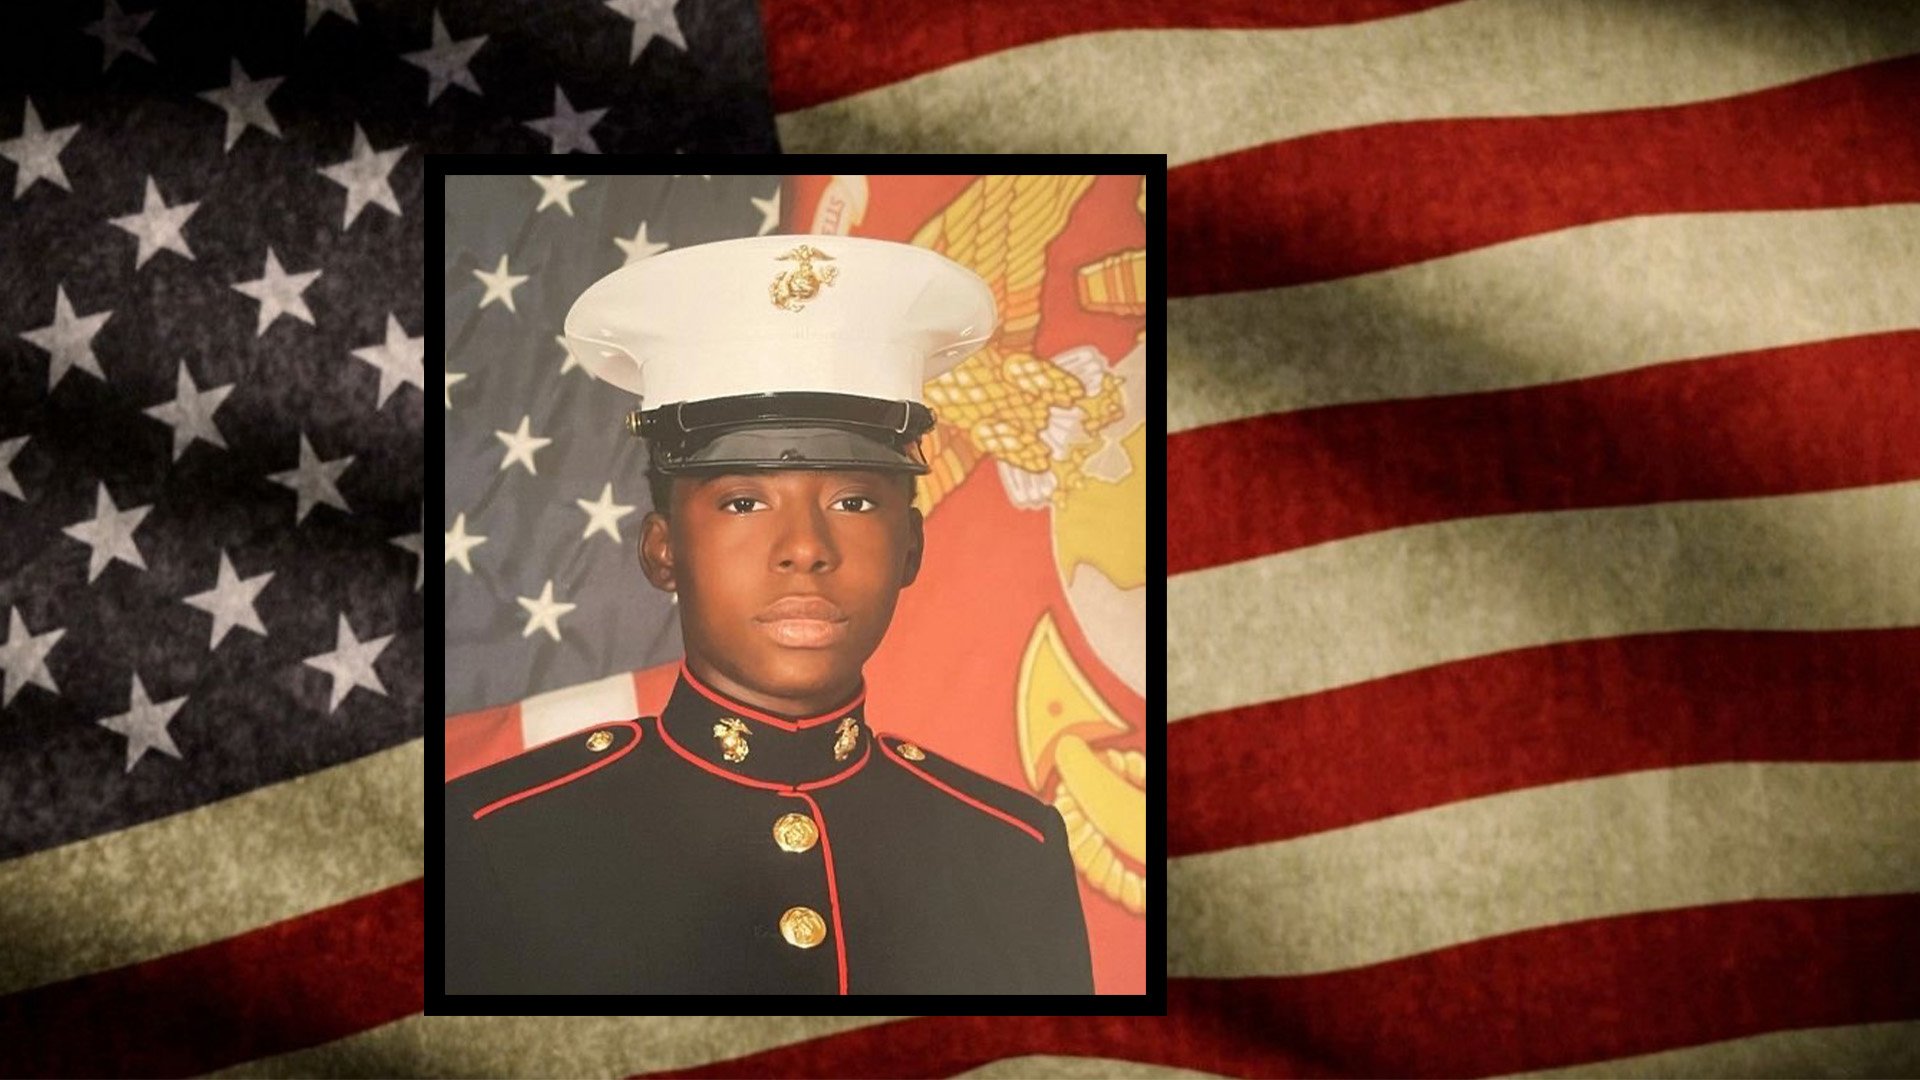 US Marine Lance Cpl. Aanesha Connor was killed in a vehicle collision on Nov. 20, 2022, in El Centro, California. Composite by Coffee or Die Magazine.